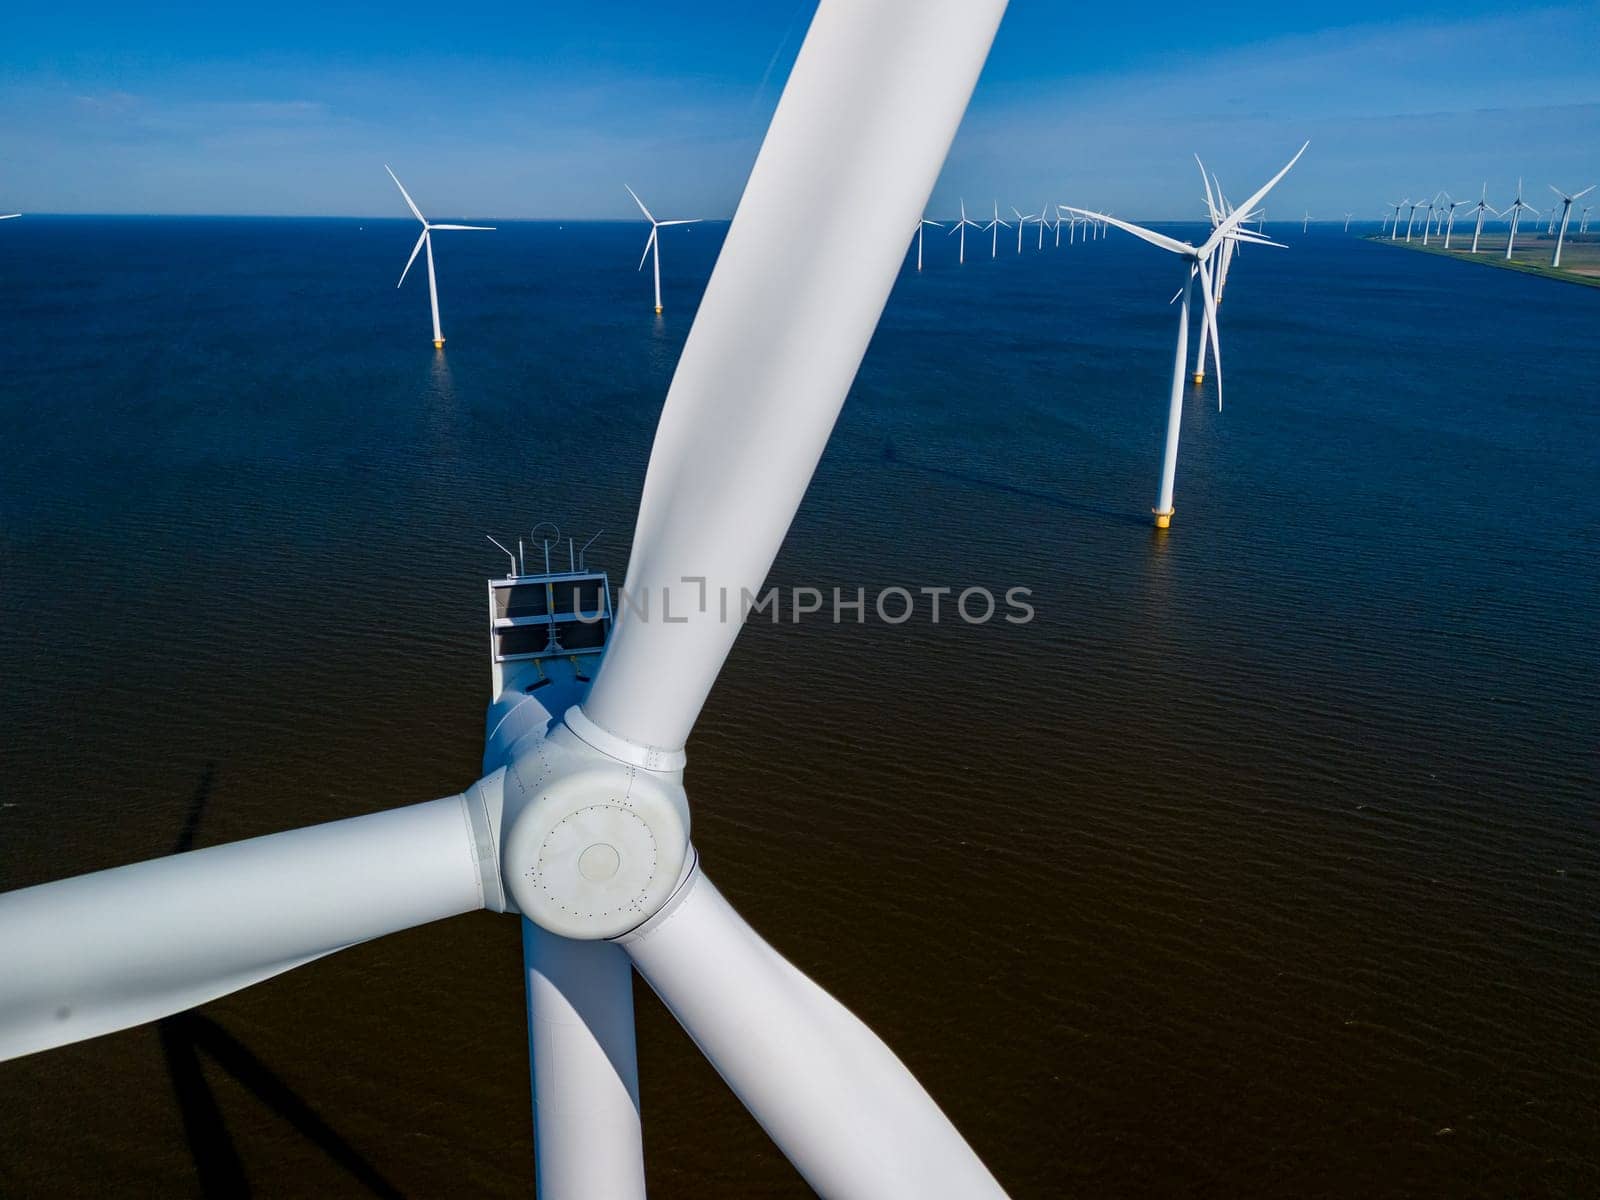 A stunning sight unfolds as windmill turbines gracefully harvest energy from the wind in the middle of a vast body of water in the Netherlands Flevoland region during the vibrant season of Spring.